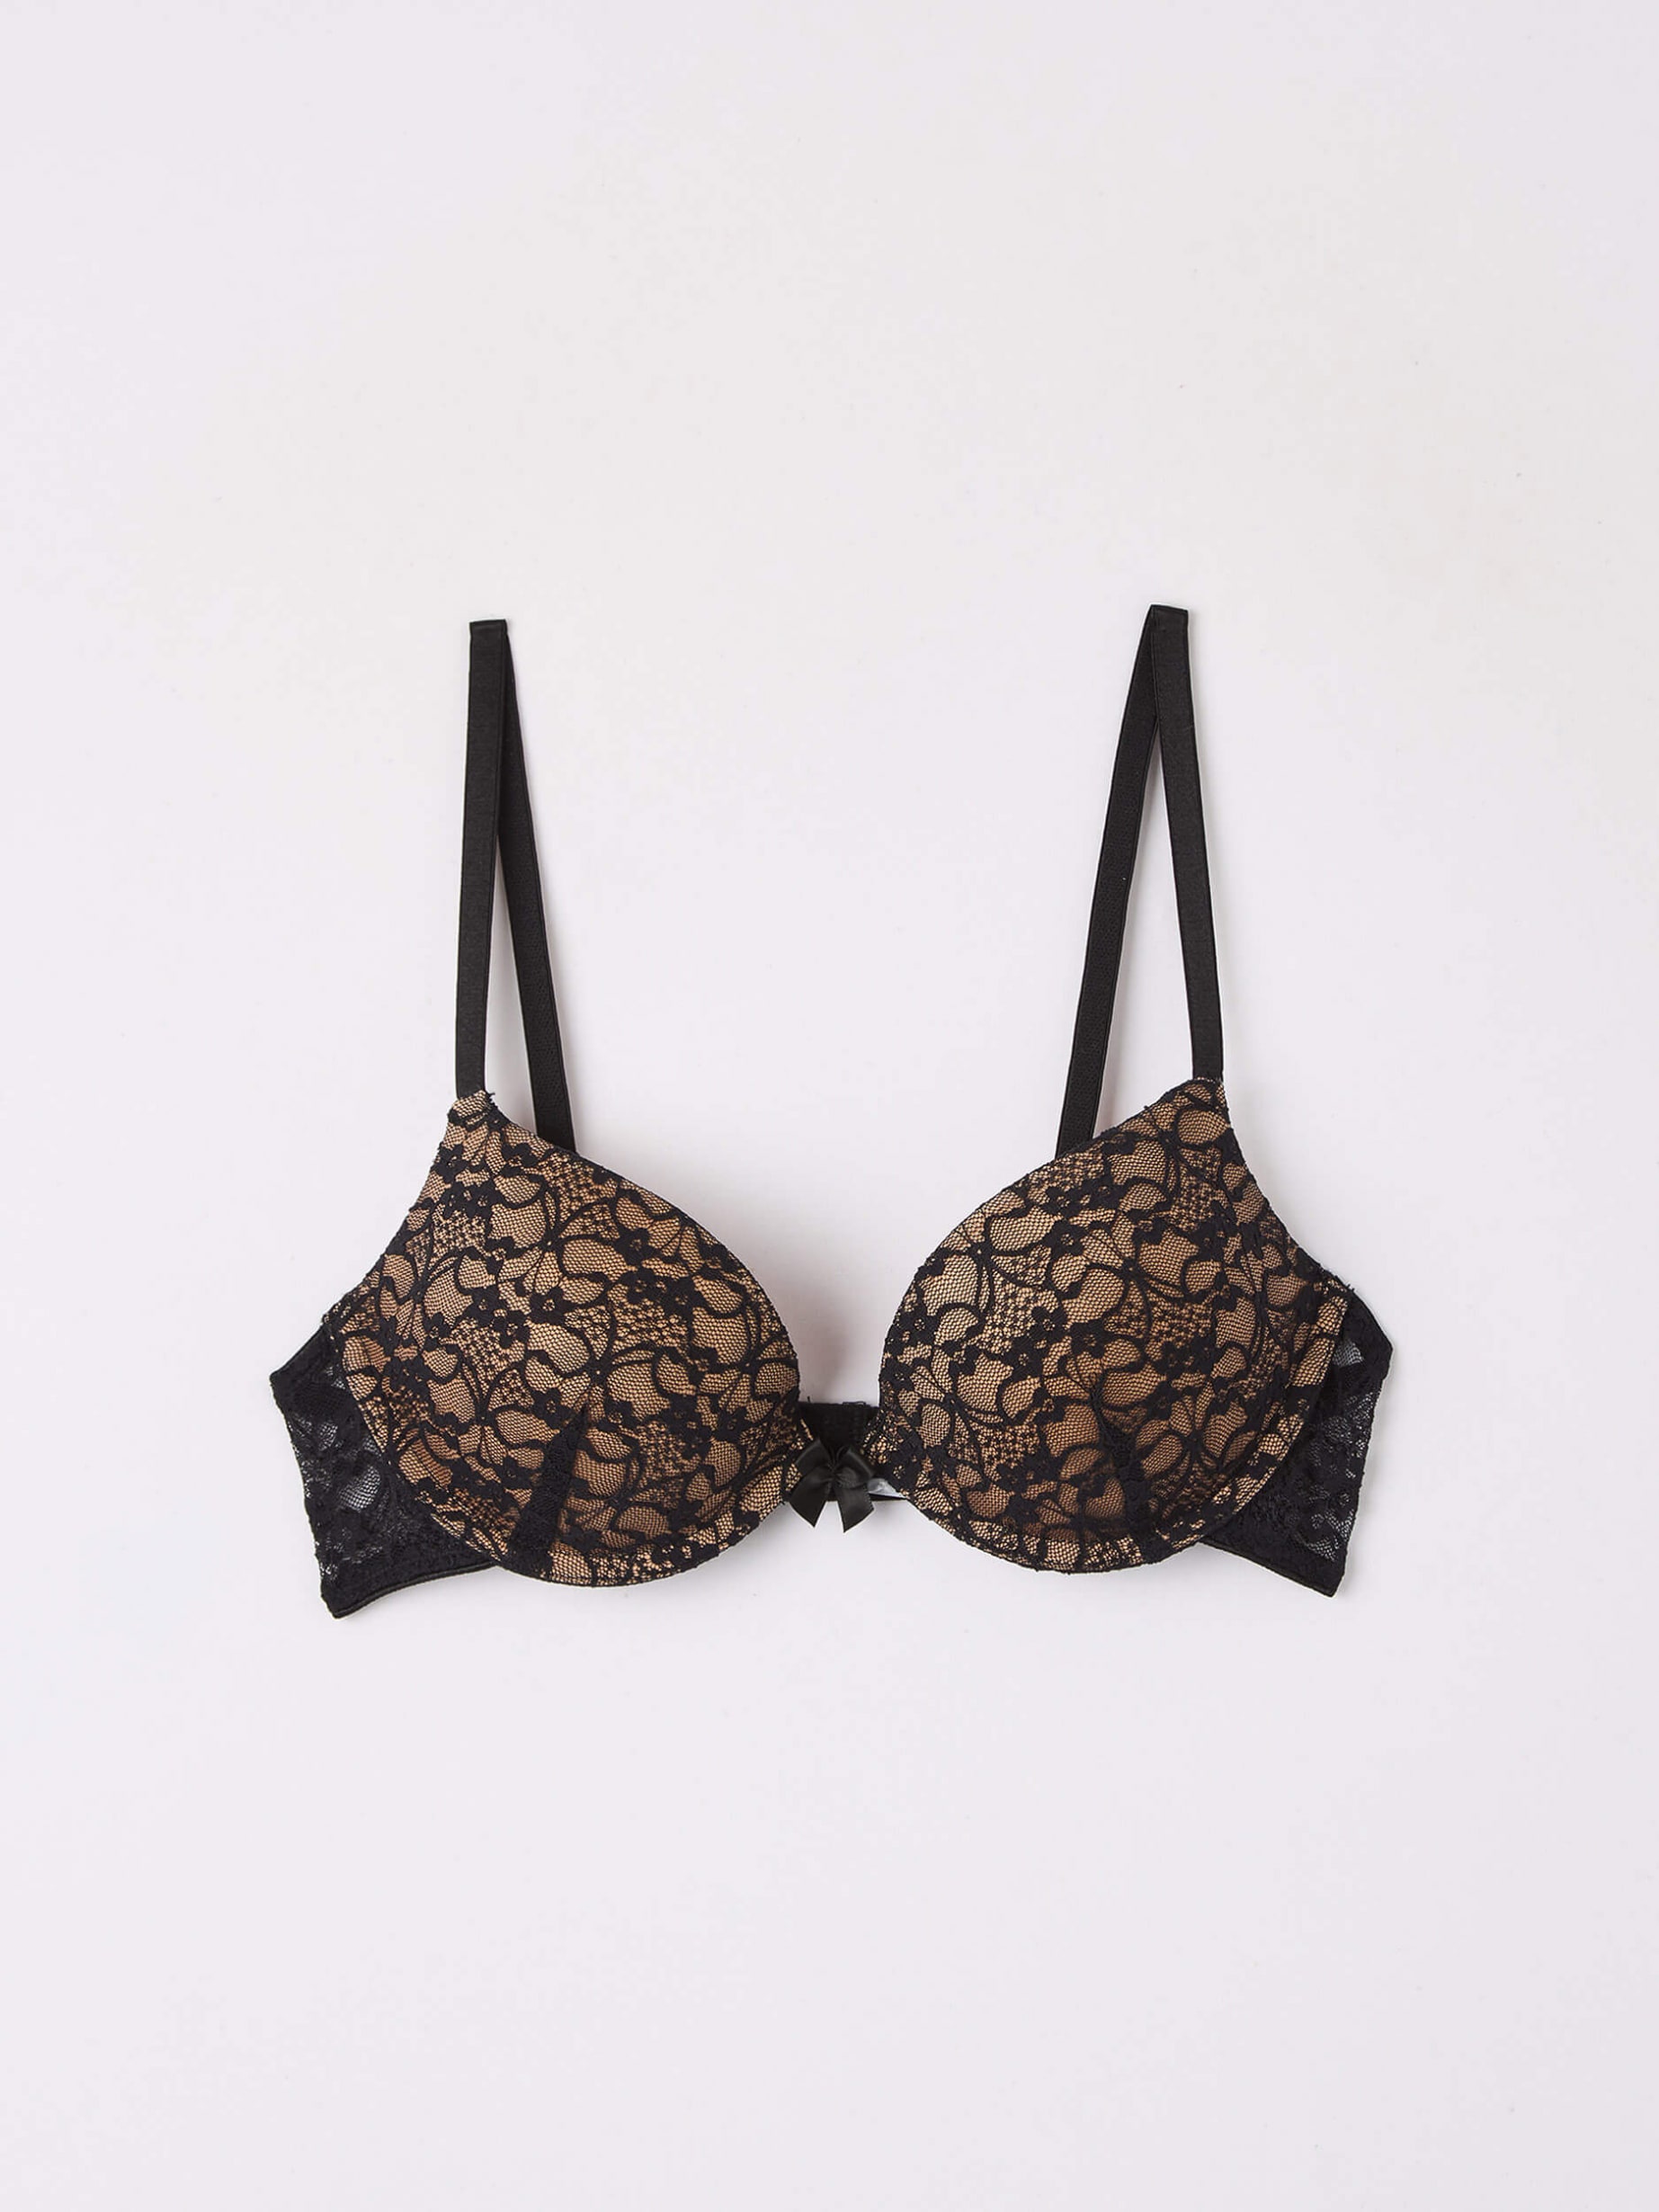 LAST ONE) 36D Push-up, Padded, Underwired Bra Black/Beige Lace NWT